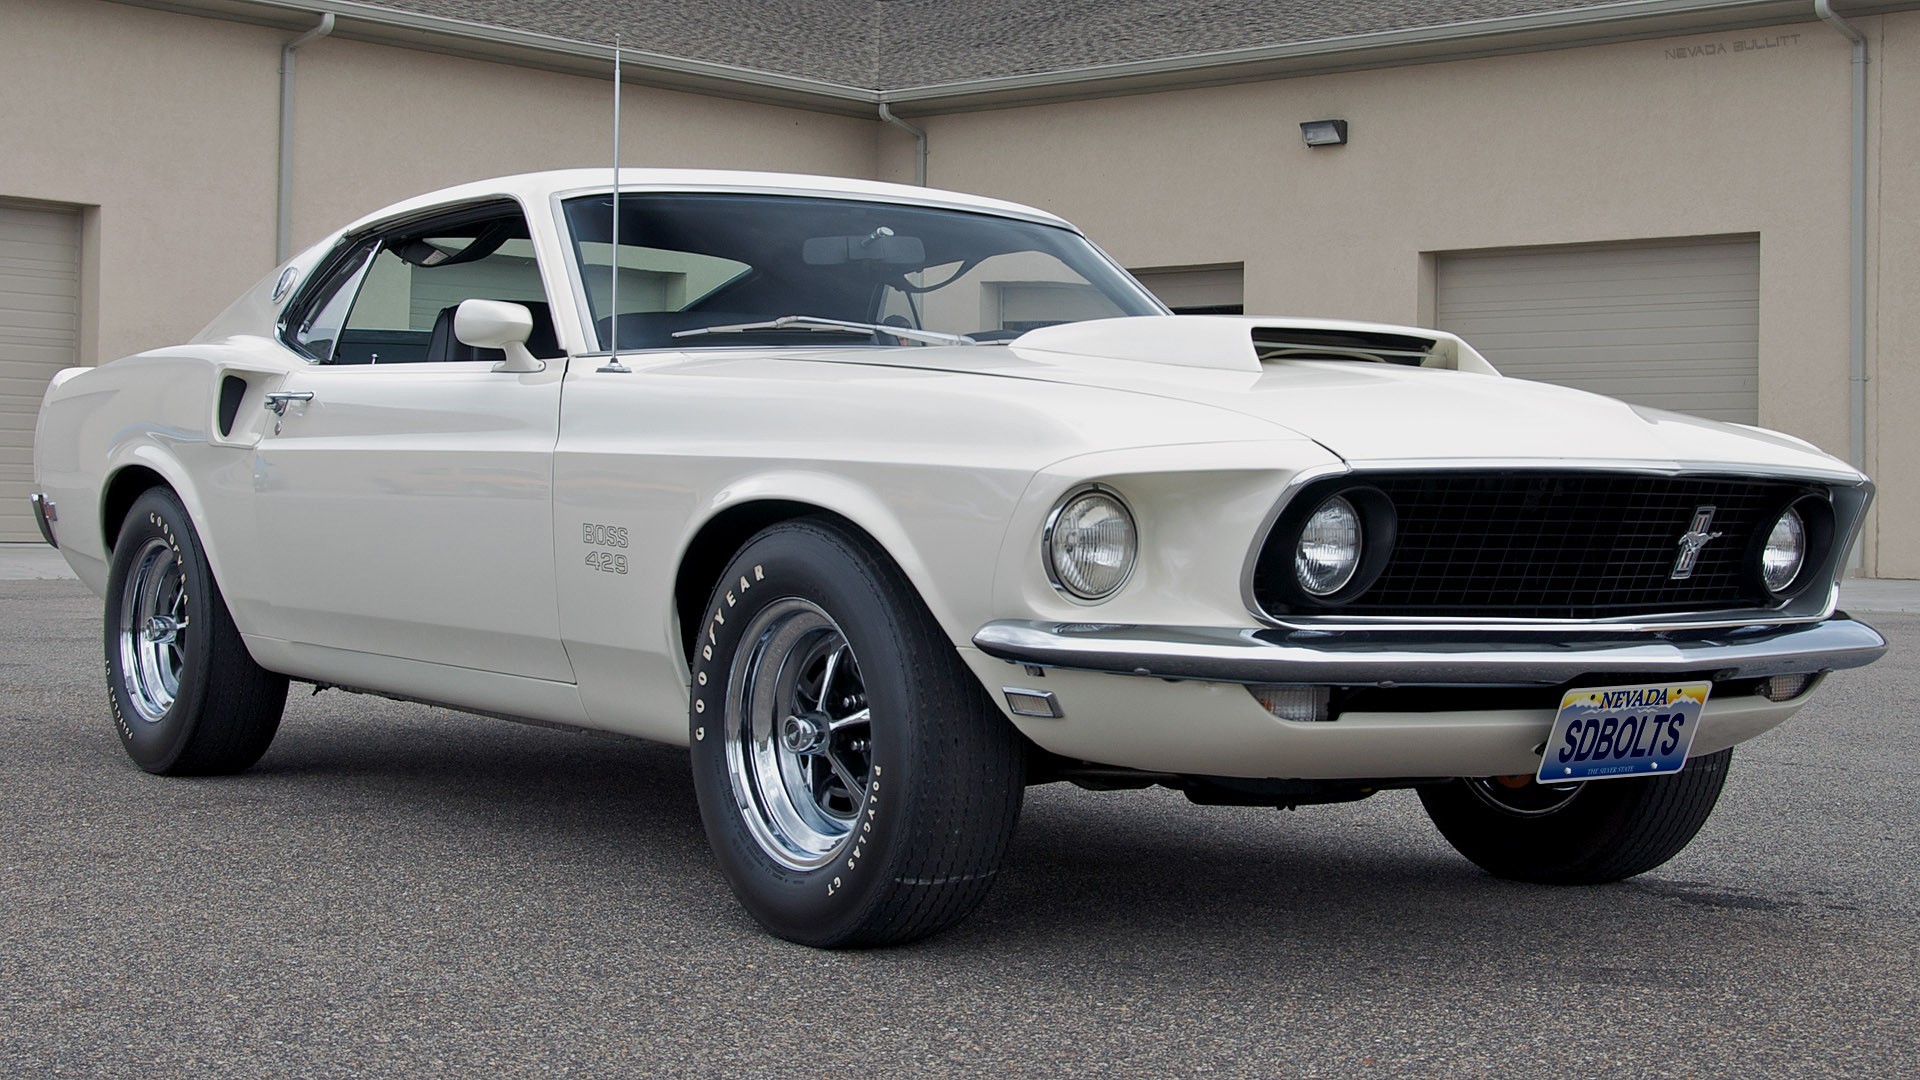 Car Boss 428 Mustang Vehicle White Cars Ford Mustang Muscle Car 1920x1080